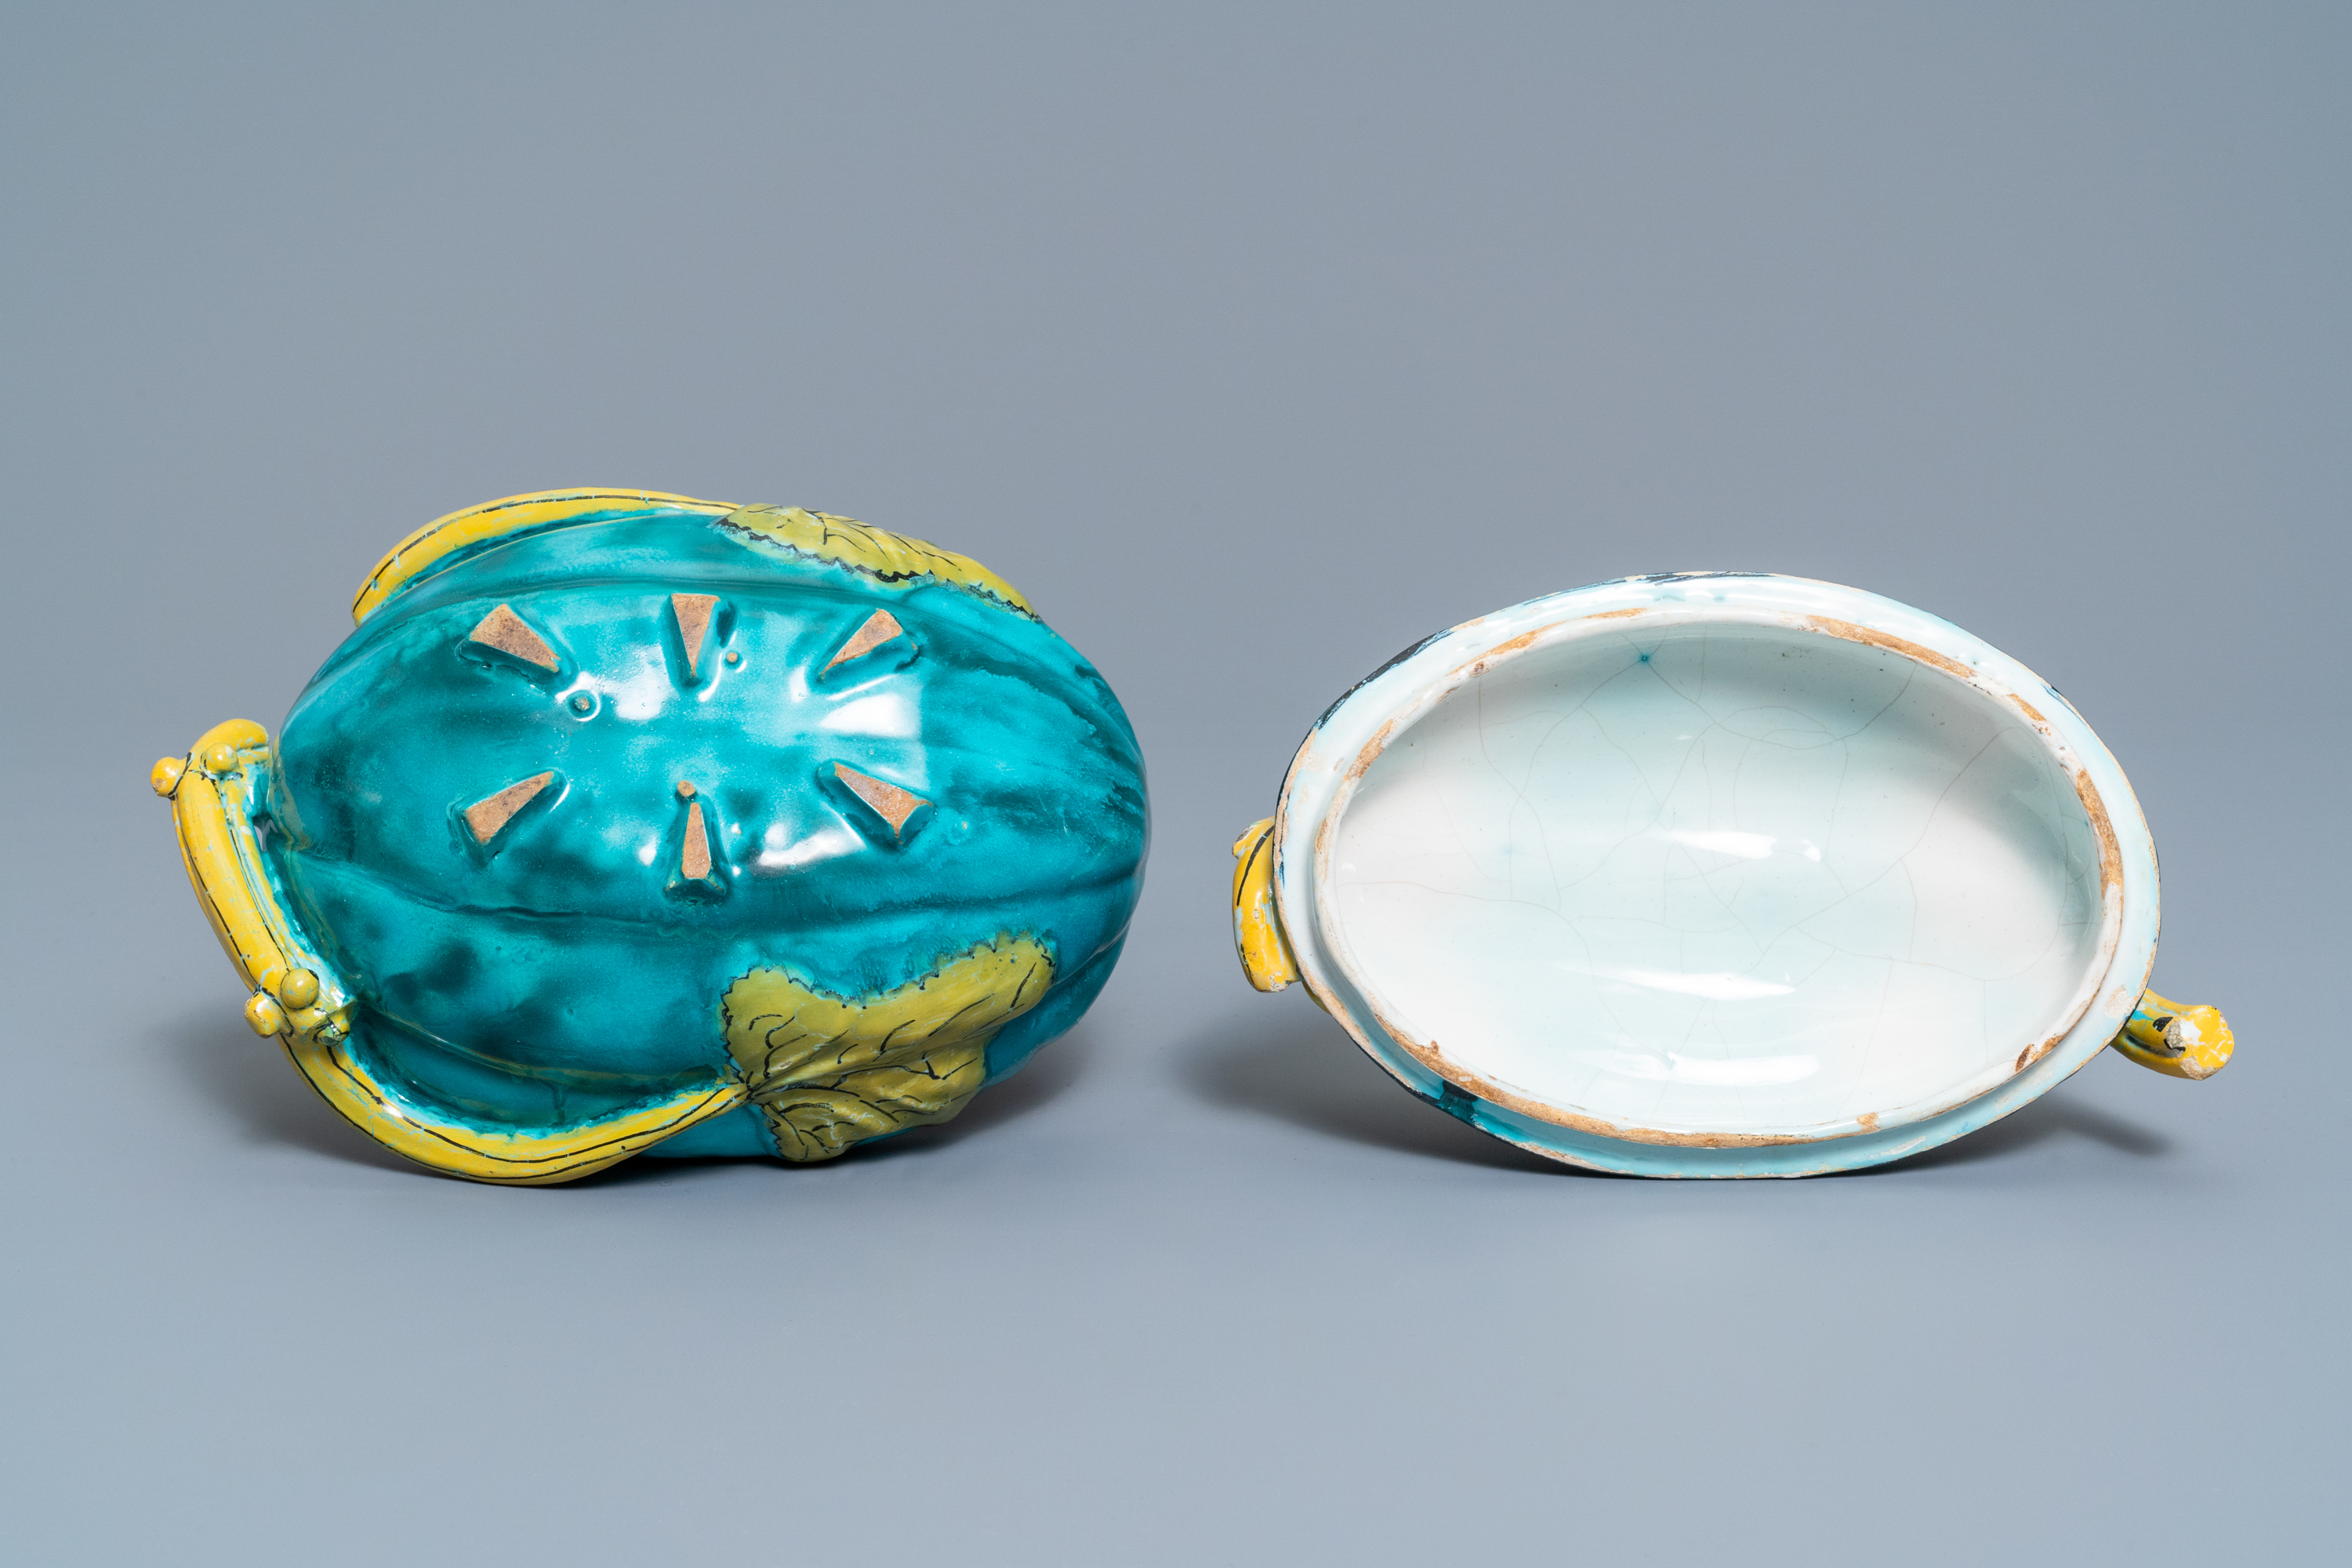 A polychrome Brussels faience melon-shaped tureen and cover, 18th C. - Image 7 of 7